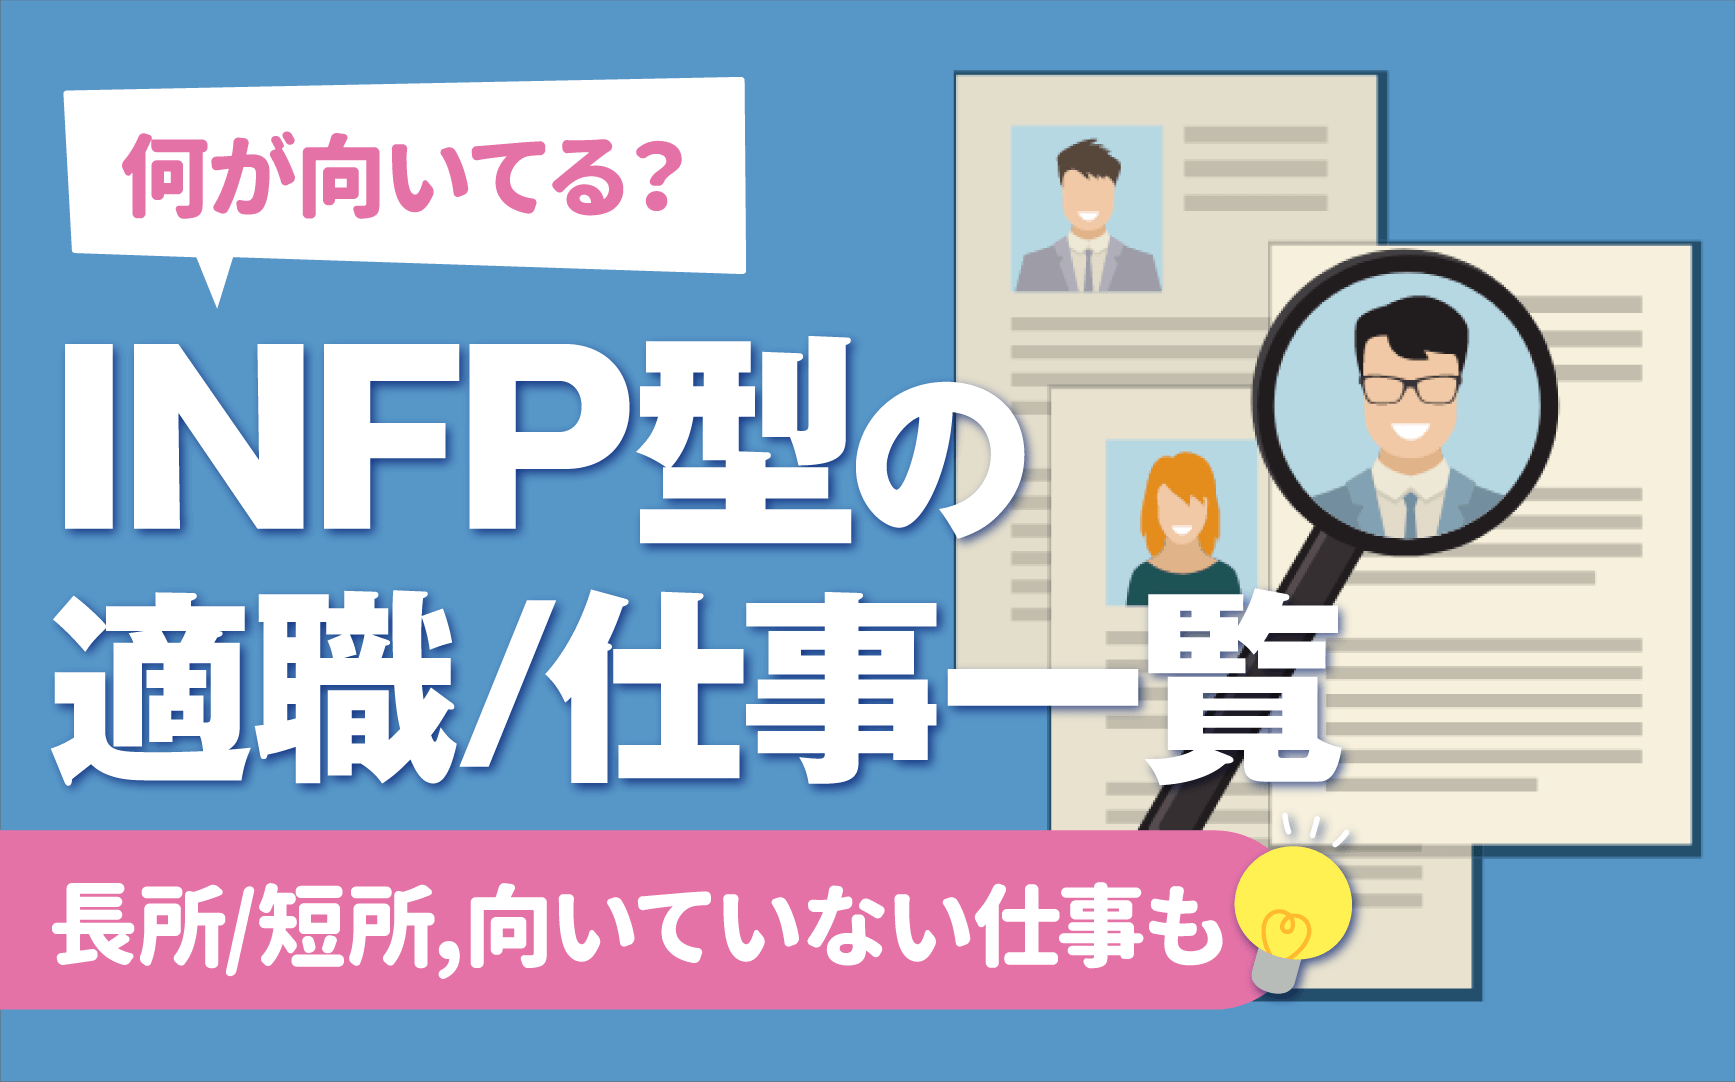 Mbti診断 Infp 仲介者型 の向いてる仕事 適職一覧 性格 Infp T Infp Aの違いも 就活の教科書 新卒大学生向け就職活動サイト